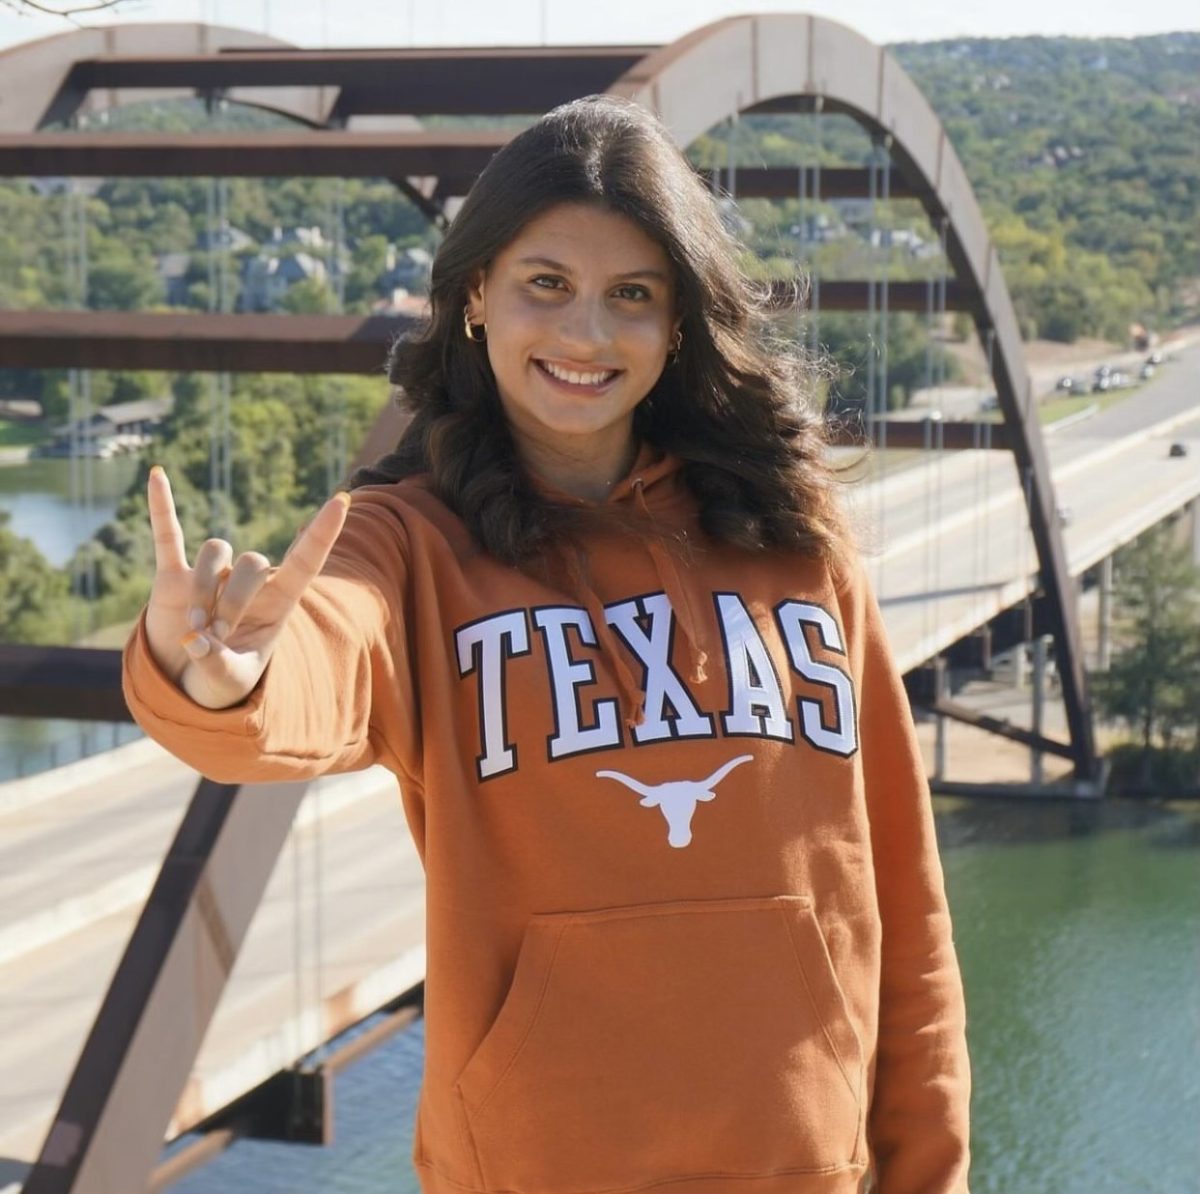 Junior Swimmer Ella Mongenel commits to the University of Texas to continue her academic and athletic career on the Women’s Swim and Dive team. She has been in communication with the Longhorn swimming staff since June, and committed in November. “Even though swimming is so individualized when you compete,having teammates there to support you makes a big difference,” Mongenel said. “I am thankful for all the people that I have met throughout my swimming career and how they helped me push through.”